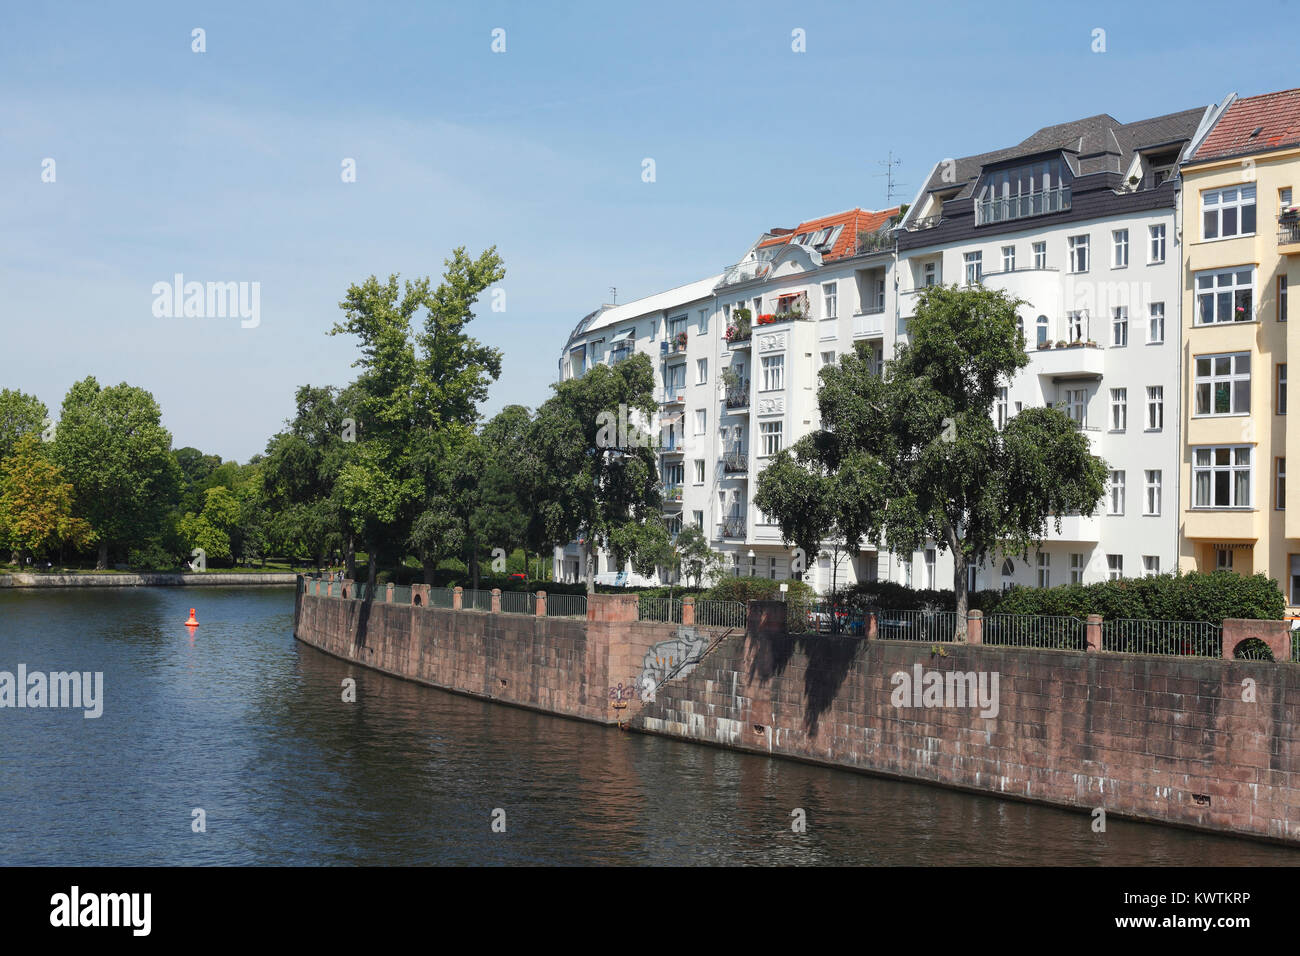 Residential buildings, old buildings and new buildings on the Spree, house facades in Charlottenburg, Berlin, Germany, Europe  I  Wohngebäude, Altbaut Stock Photo